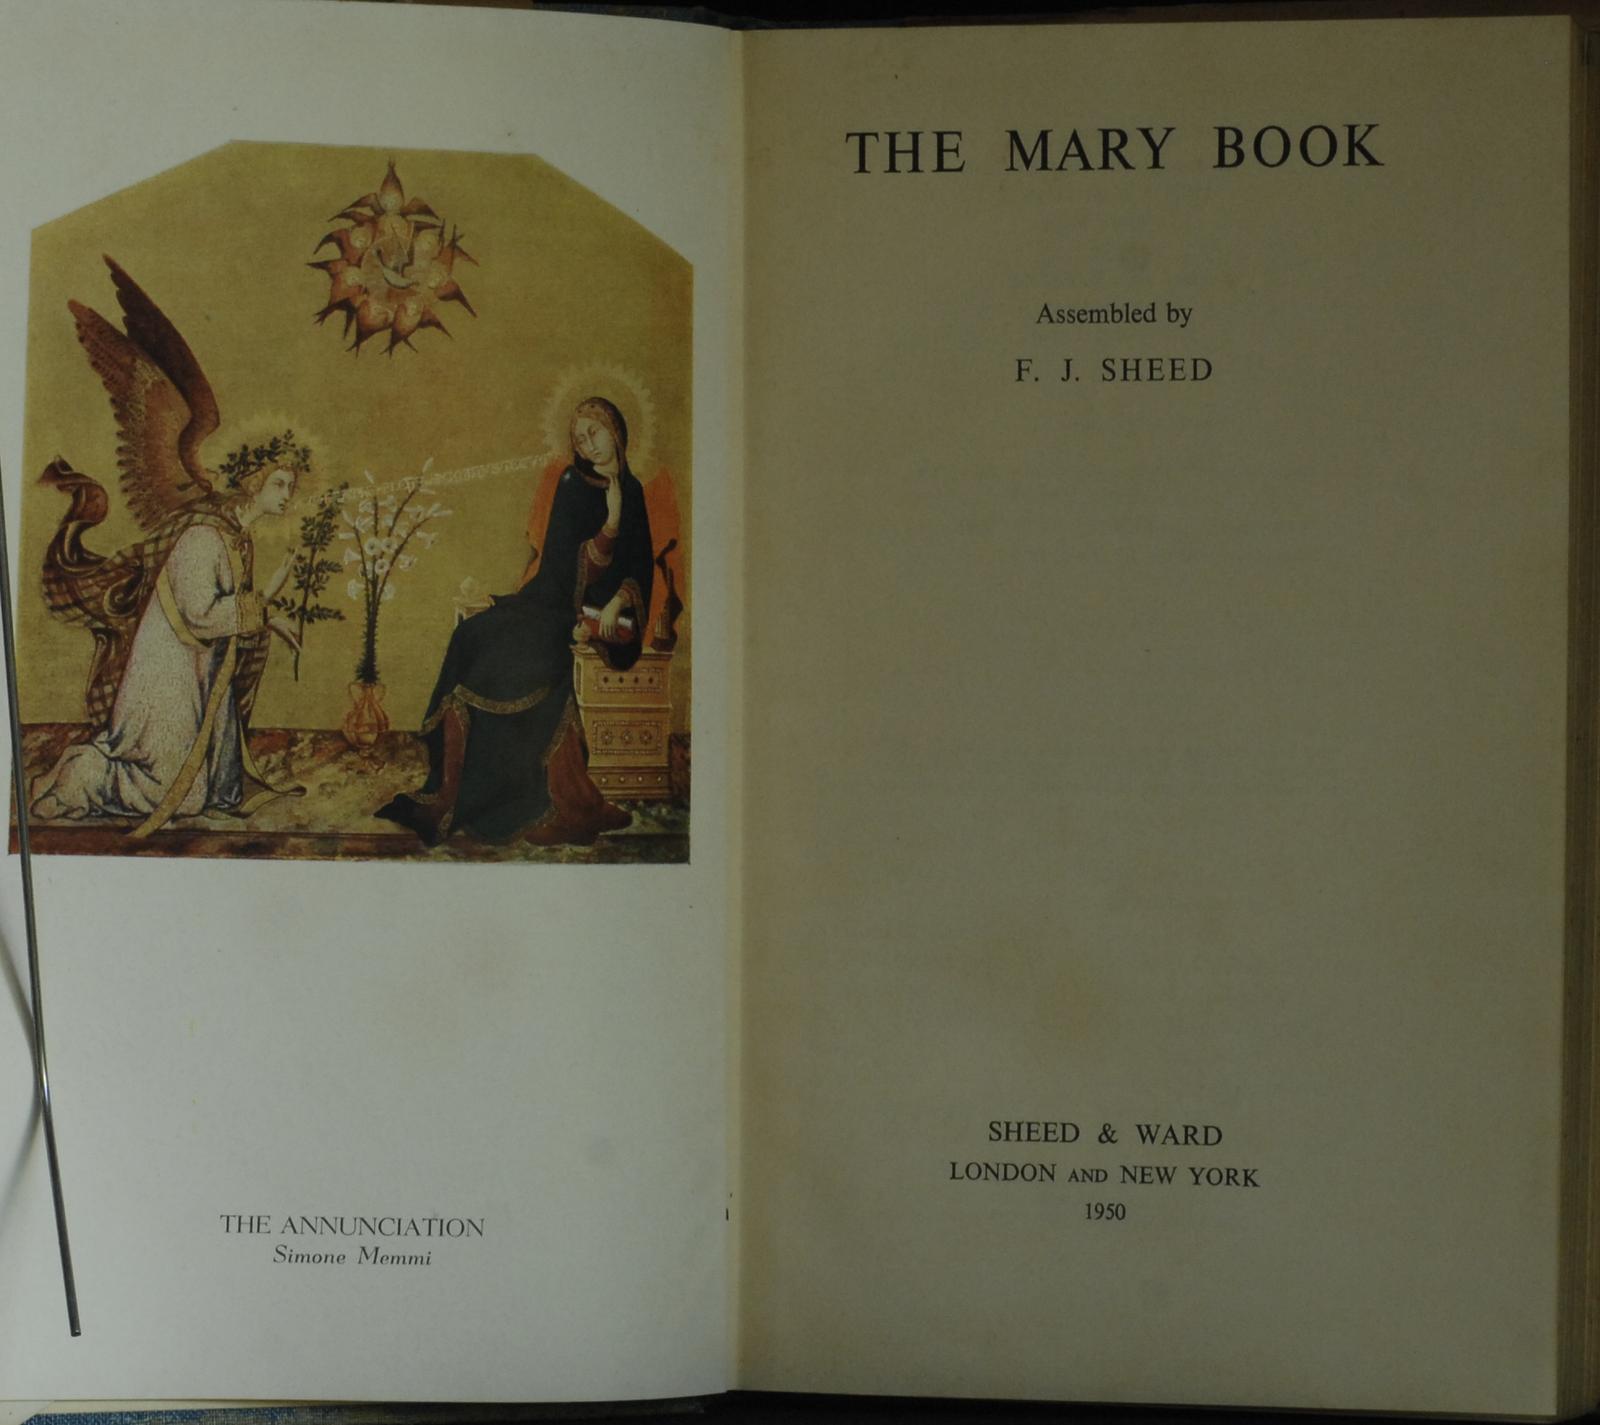 mbb006945c_-_Sheed_Frank_-_Ward_Maisie_-_The_Mary_Book_-_Contains_Illustrations.jpg